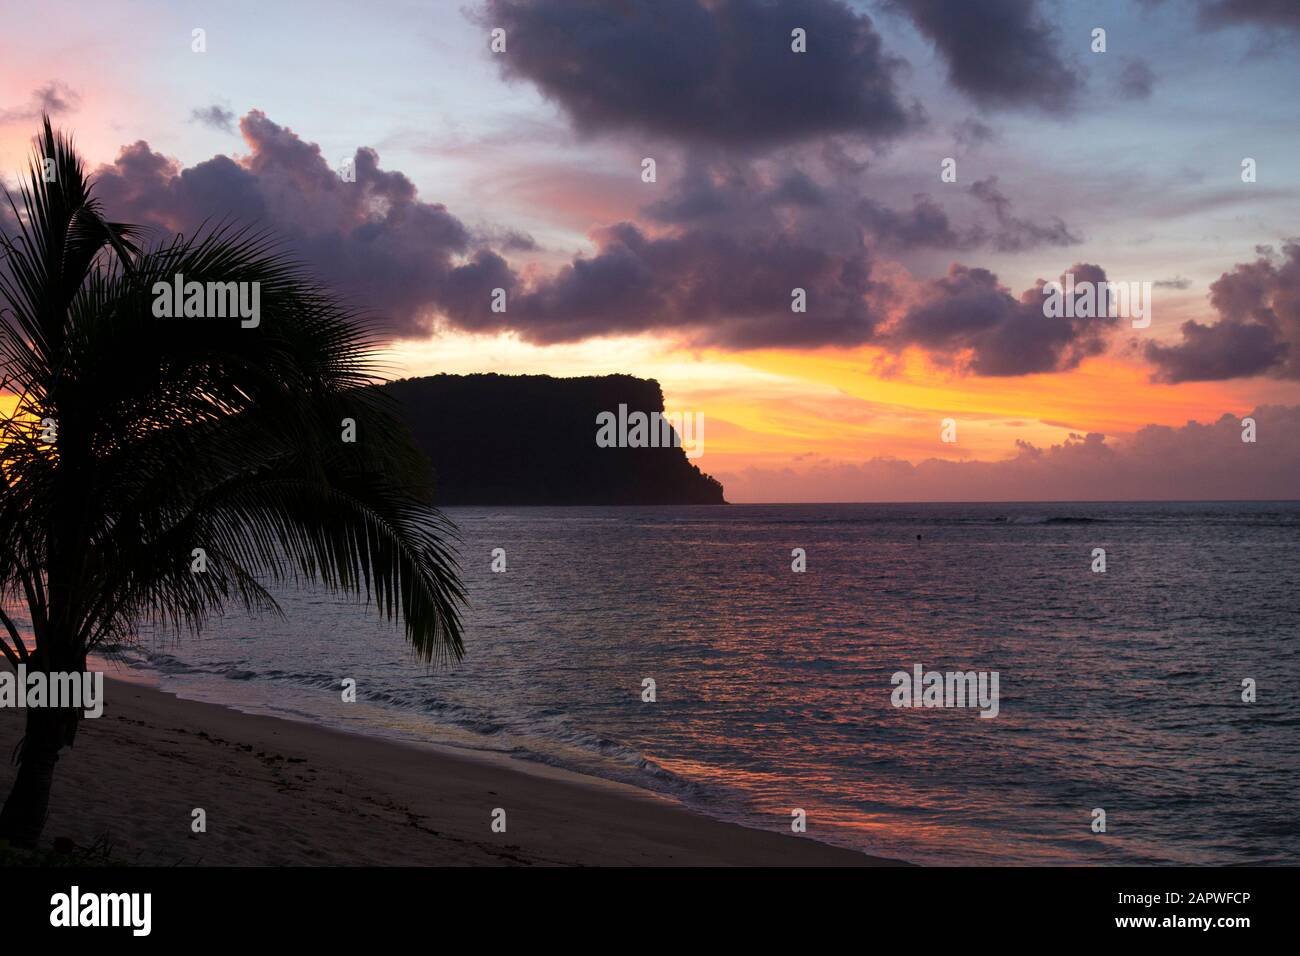 Small palm tree at sandy beach during a pink and orange sunrise Stock Photo